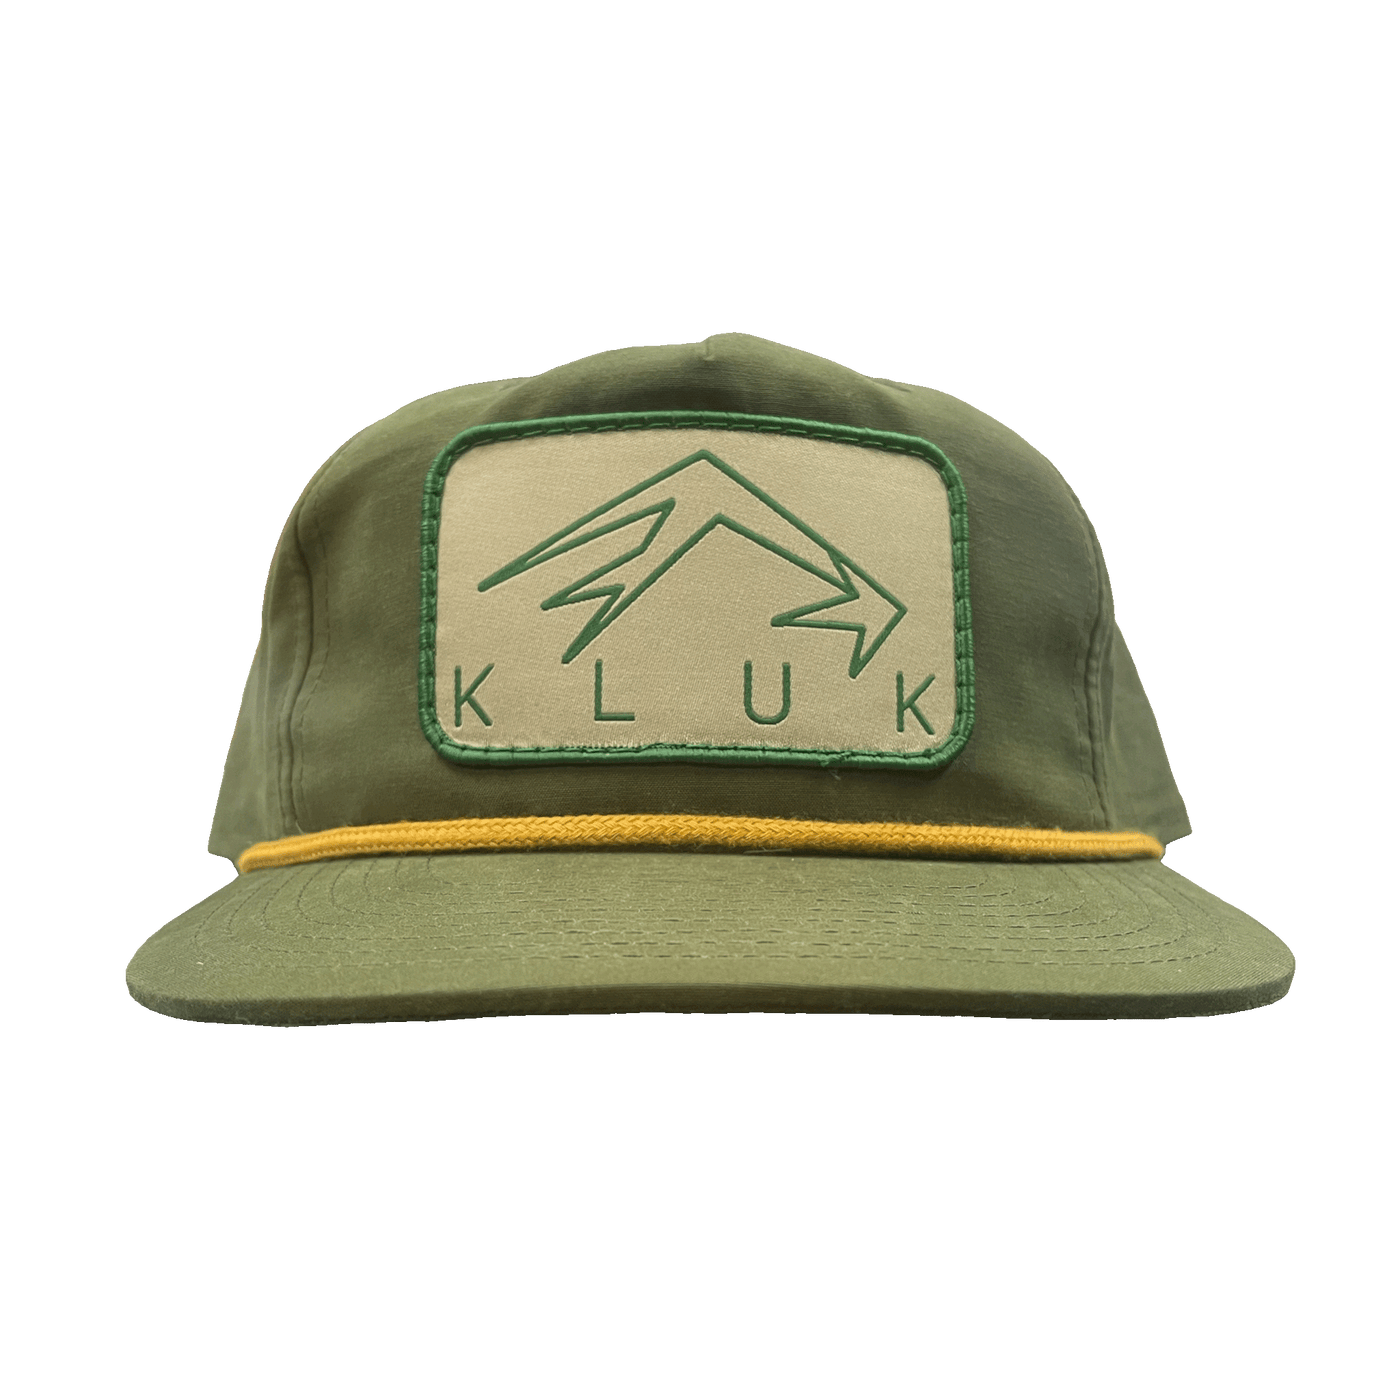 The Loden Gold Pap hat front profile showing off the logo